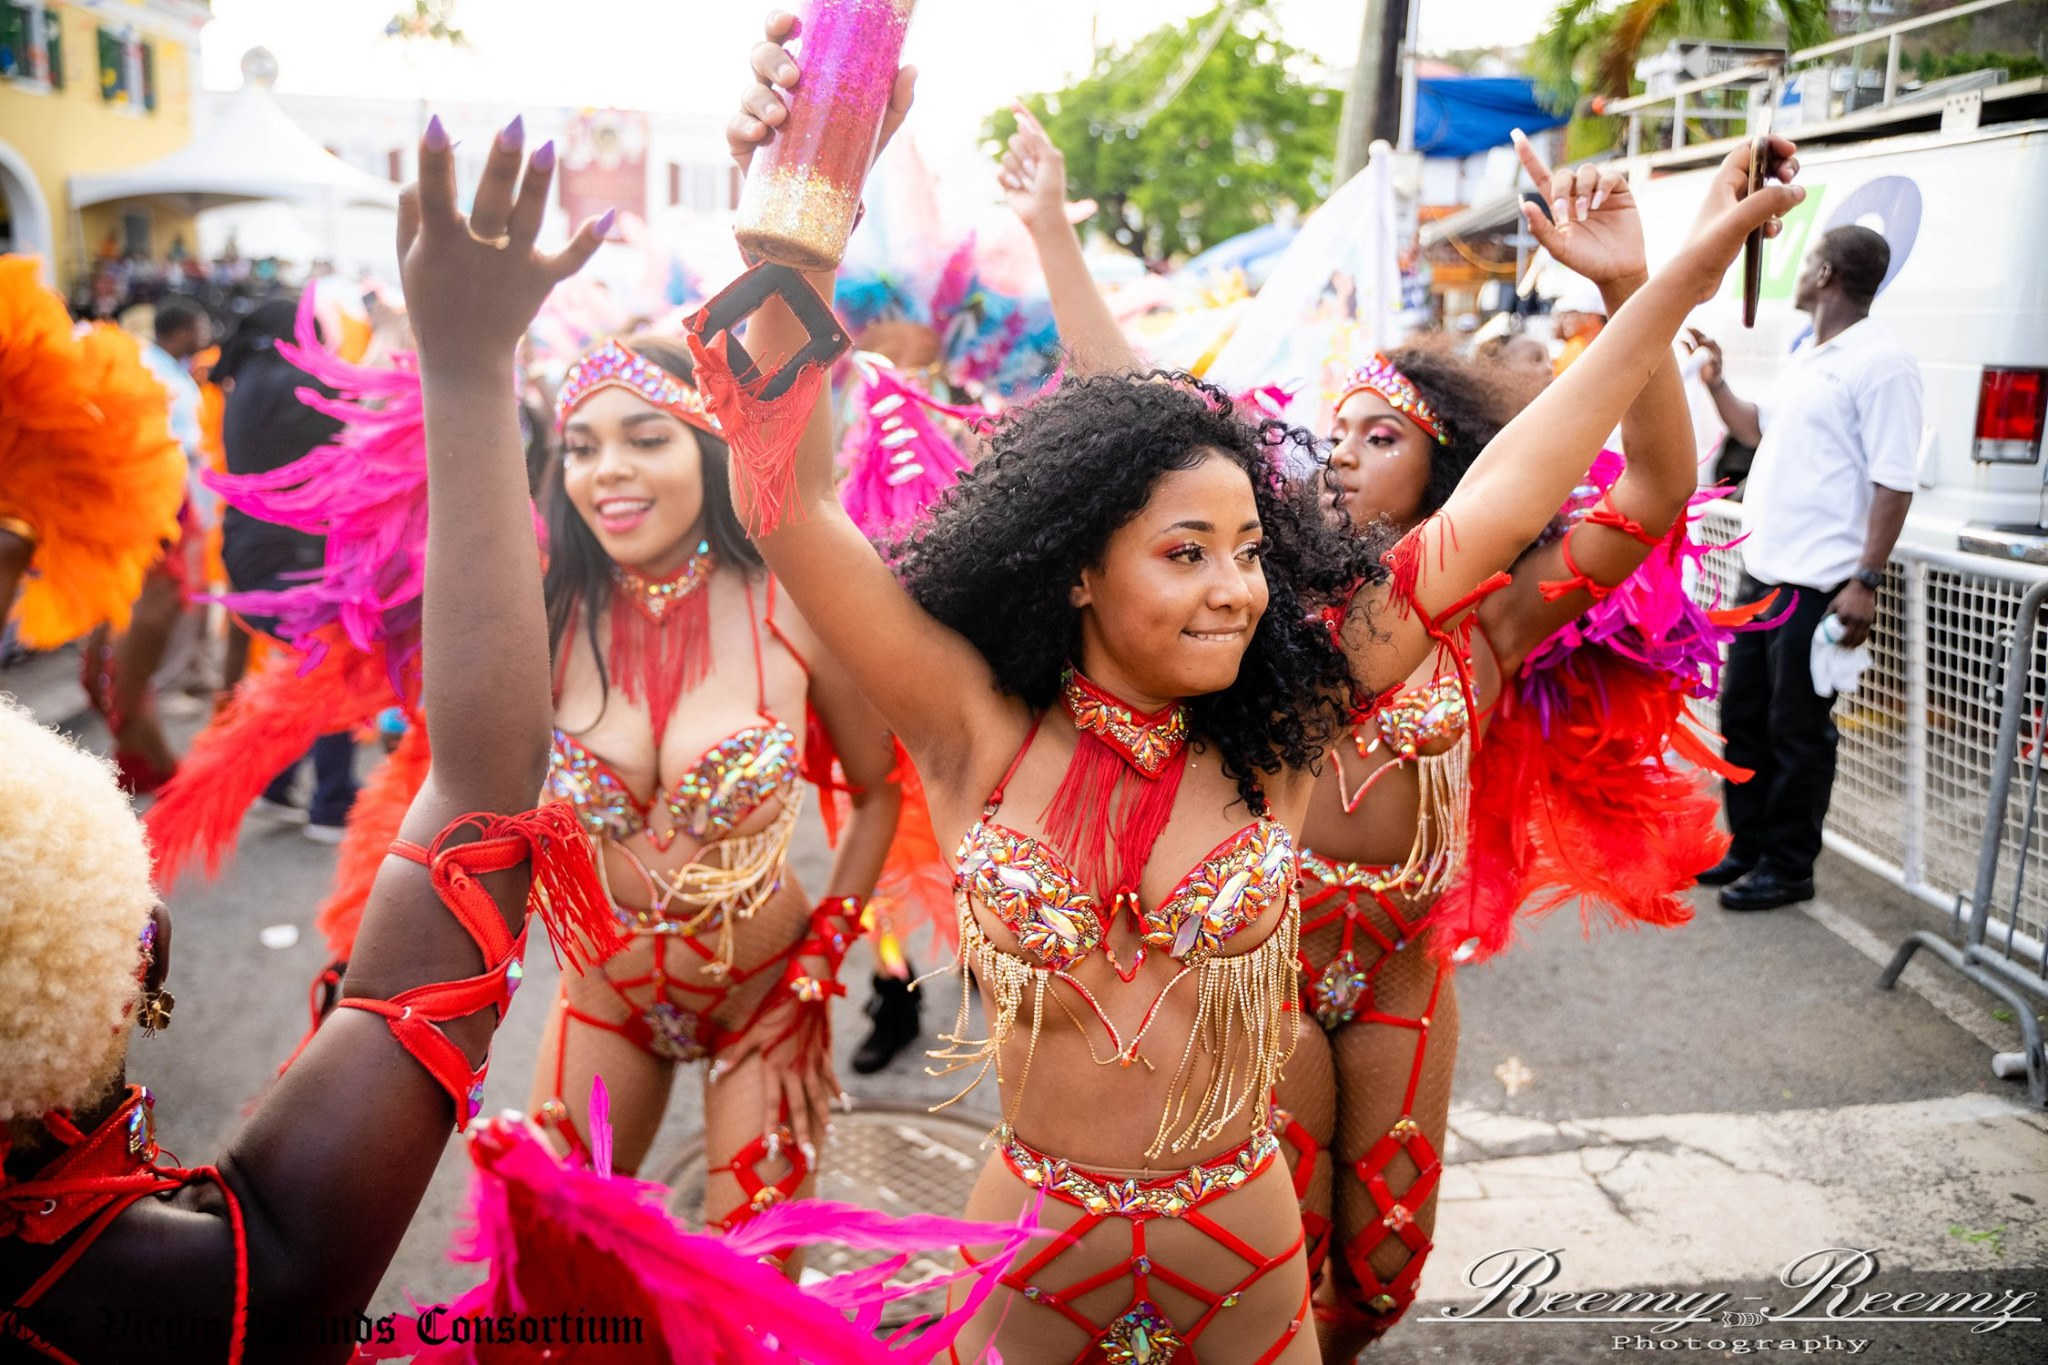 Carnival in St. Thomas This Year? Bryan Says Preliminary Plans Include